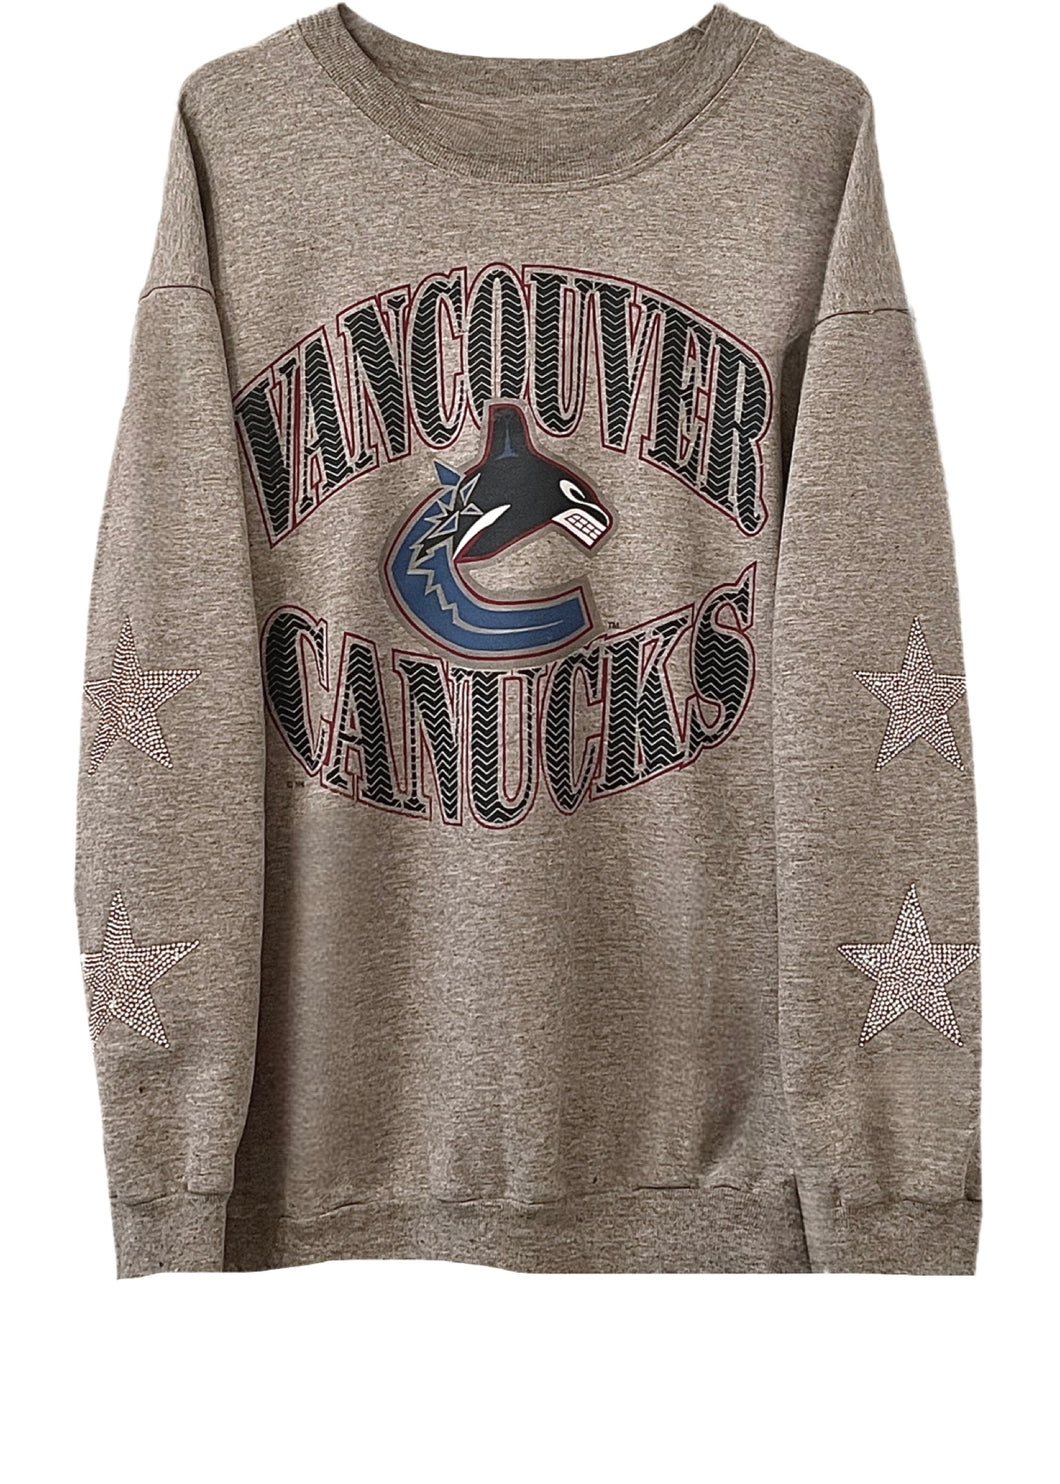 New York Rangers, NHL One of a KIND Vintage Hoodie with Crystal Stars  Design.